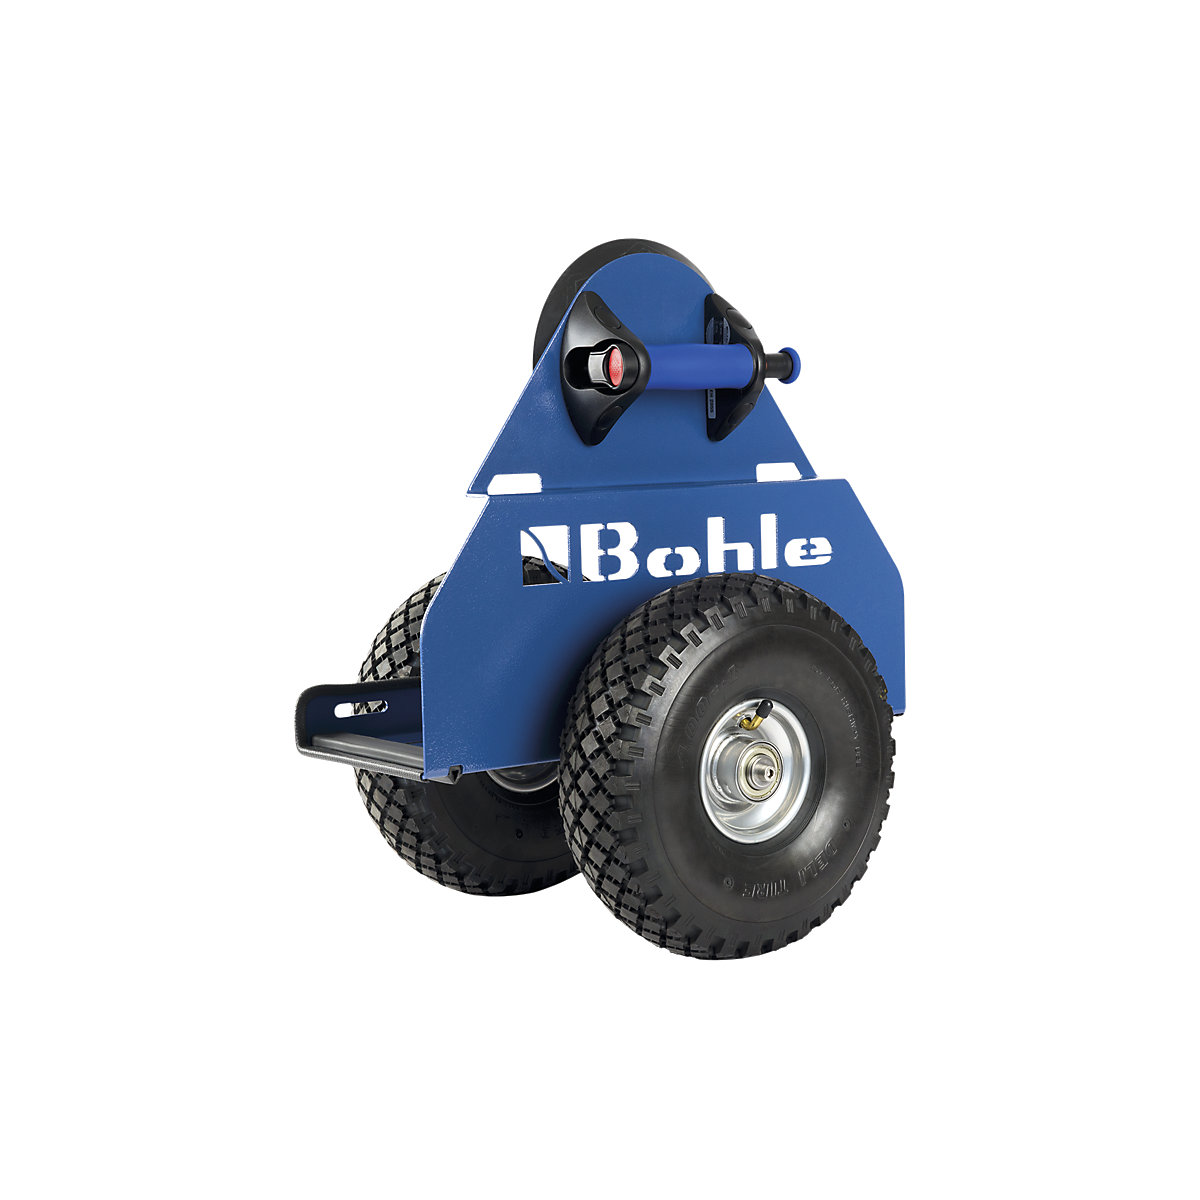 Platform trolley with VERIBOR® suction lifter - Bohle